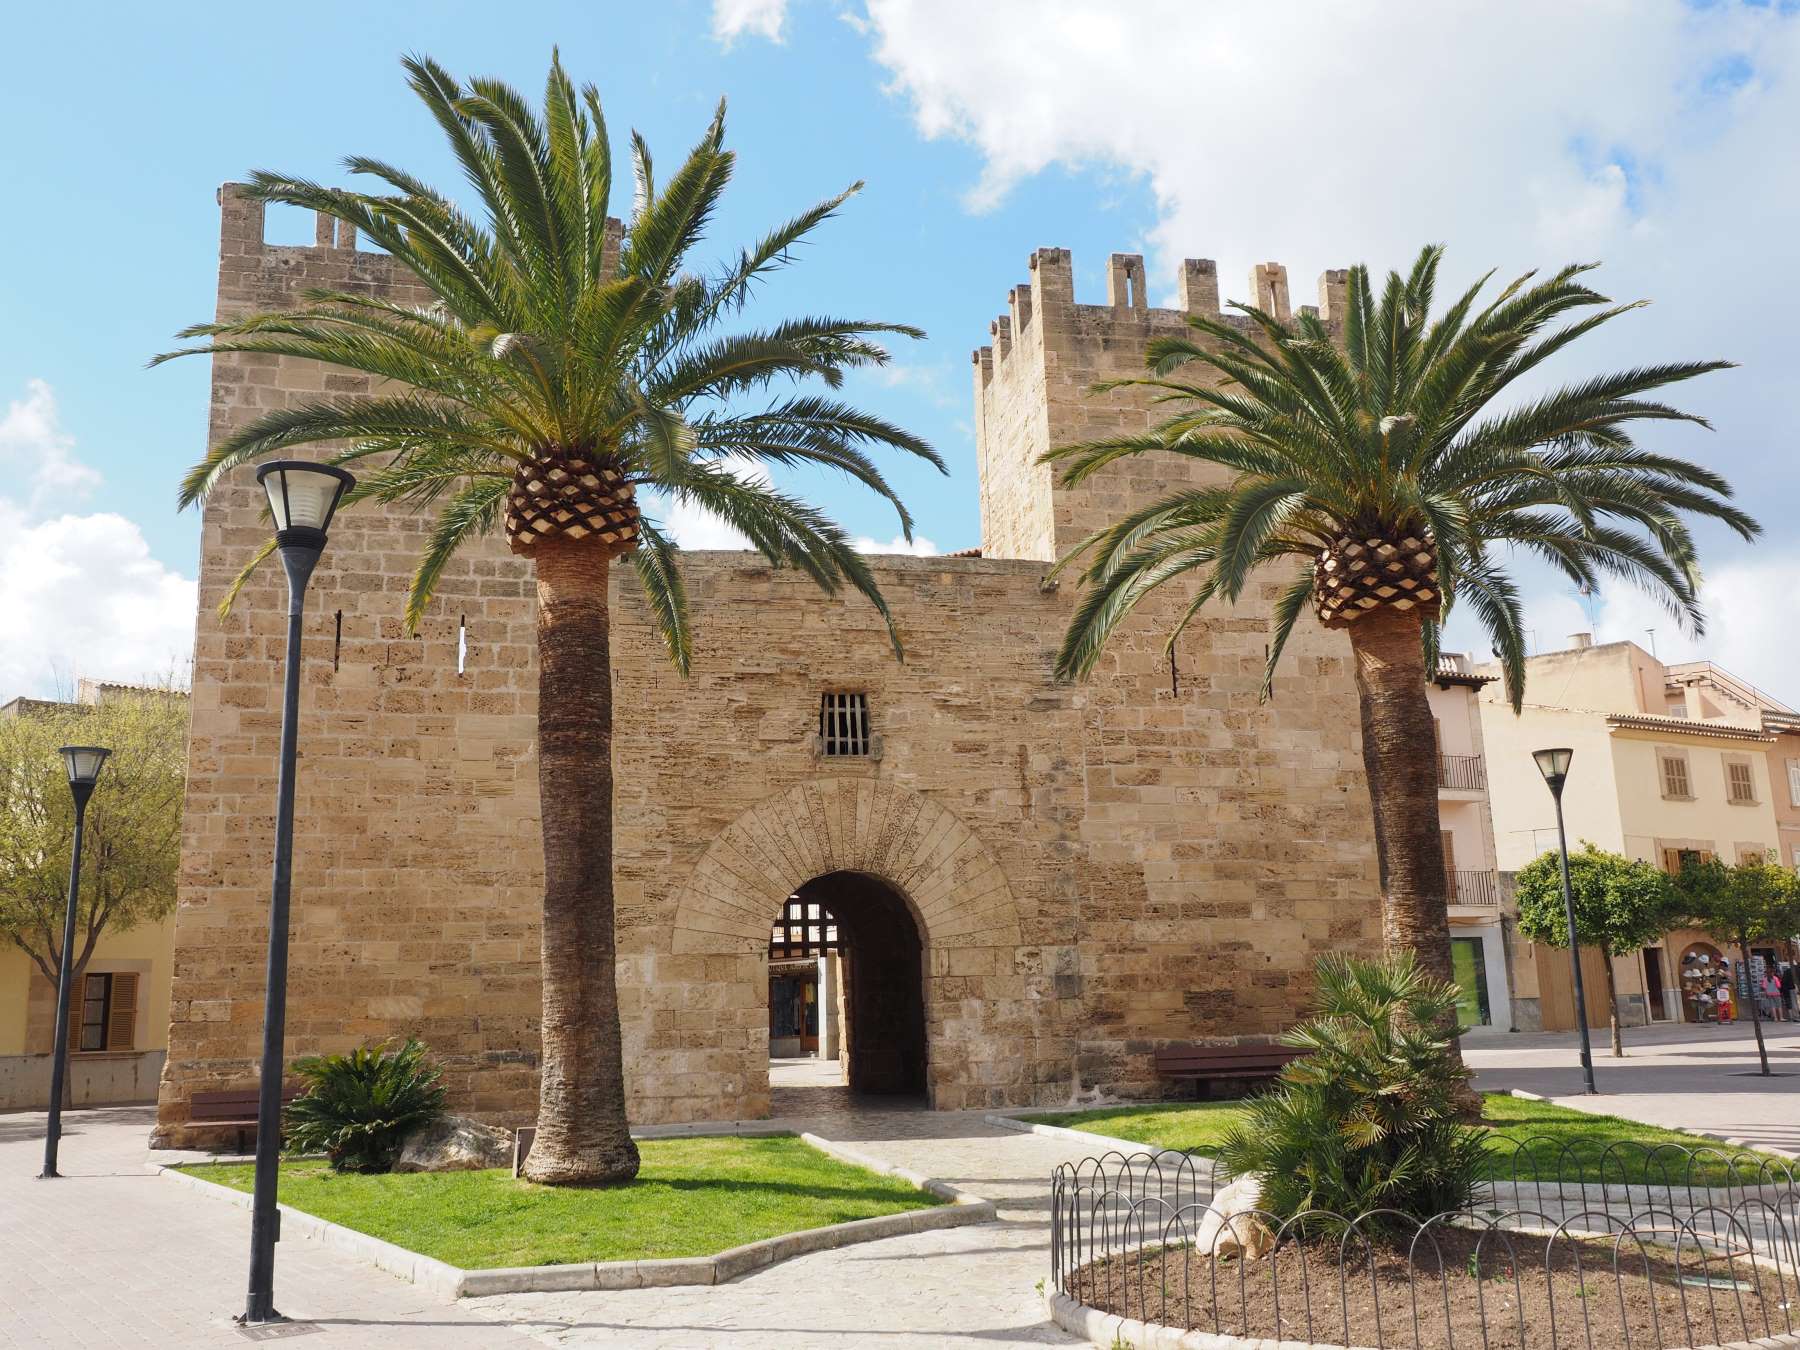 14 Best Things to Do in Alcudia, Mallorca - Endless Travel Destinations